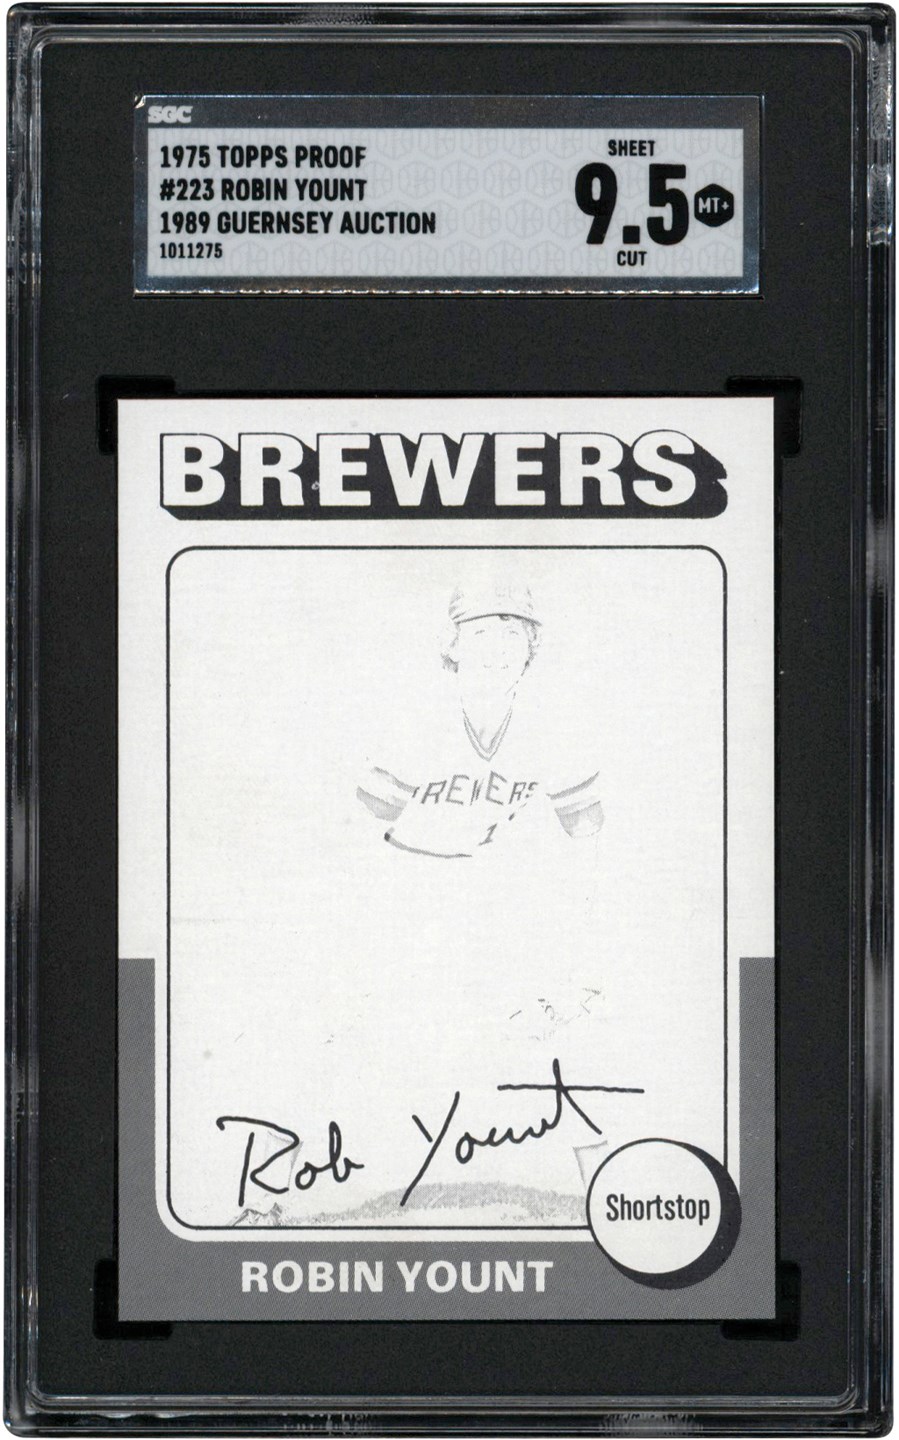 - 1975 Topps Baseball Black & White Proof #223 Robin Yount Rookie Card "1/1" SGC MINT+ 9.5 (ex-1989 Guernsey Auction)